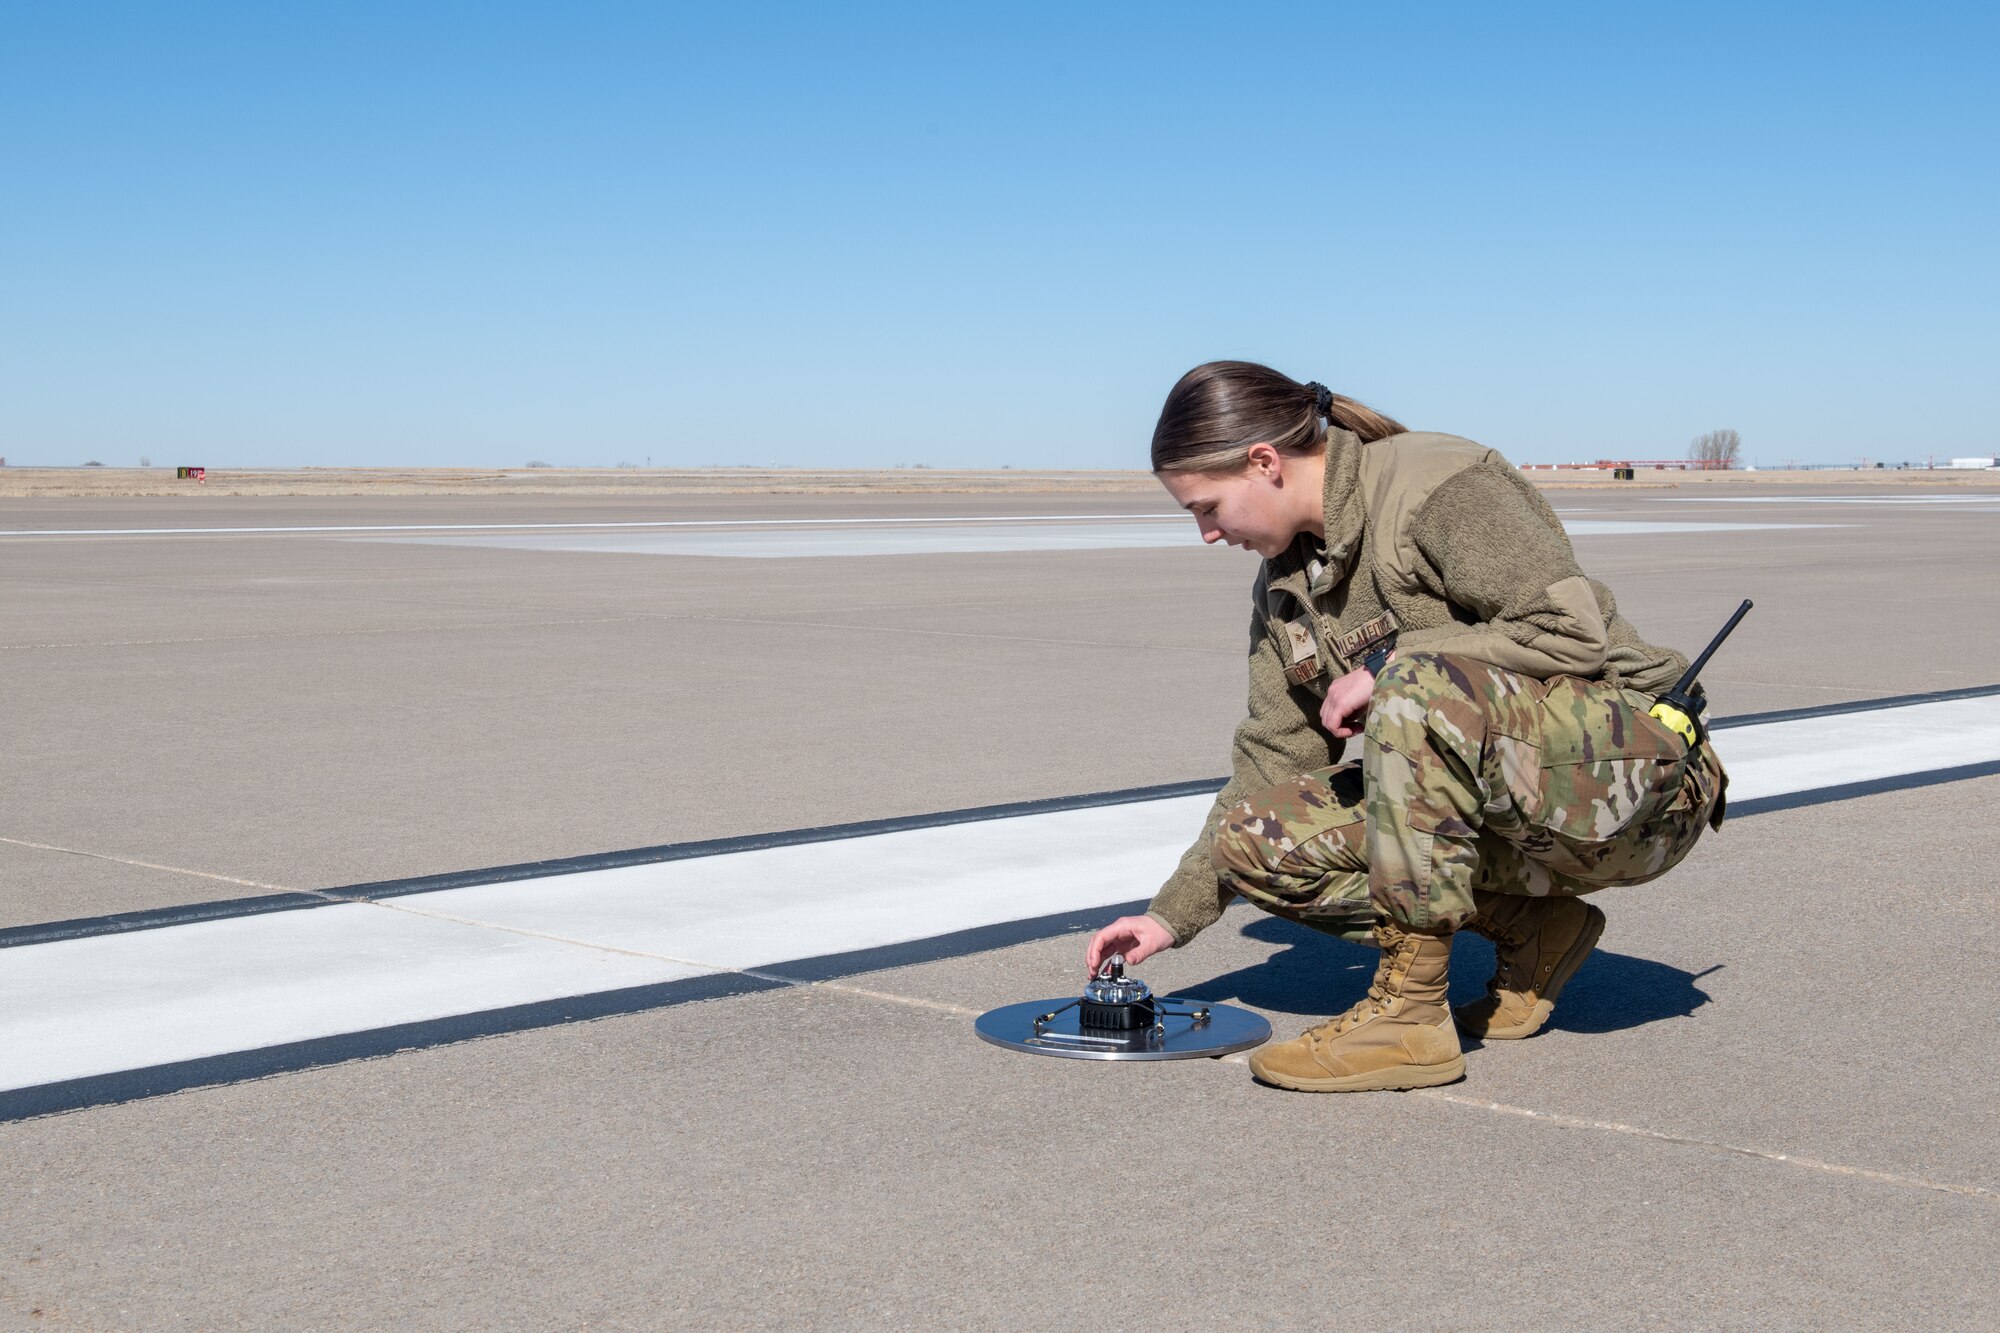 A close-up shot of a Phantom ALZ-15 portable landing zone light at McConnell Air Force Base, Kansas, Feb. 17, 2023. These lights are small, lightweight, and durable units that can be quickly deployed to mark a temporary landing zone for aircraft during emergency situations, disaster relief efforts, or military operations. These lights provide visual guidance for pilots during approach and landing, making it safer to land in remote or otherwise inaccessible locations. (U.S. Air Force photo by Staff Sgt. Adam Goodly)